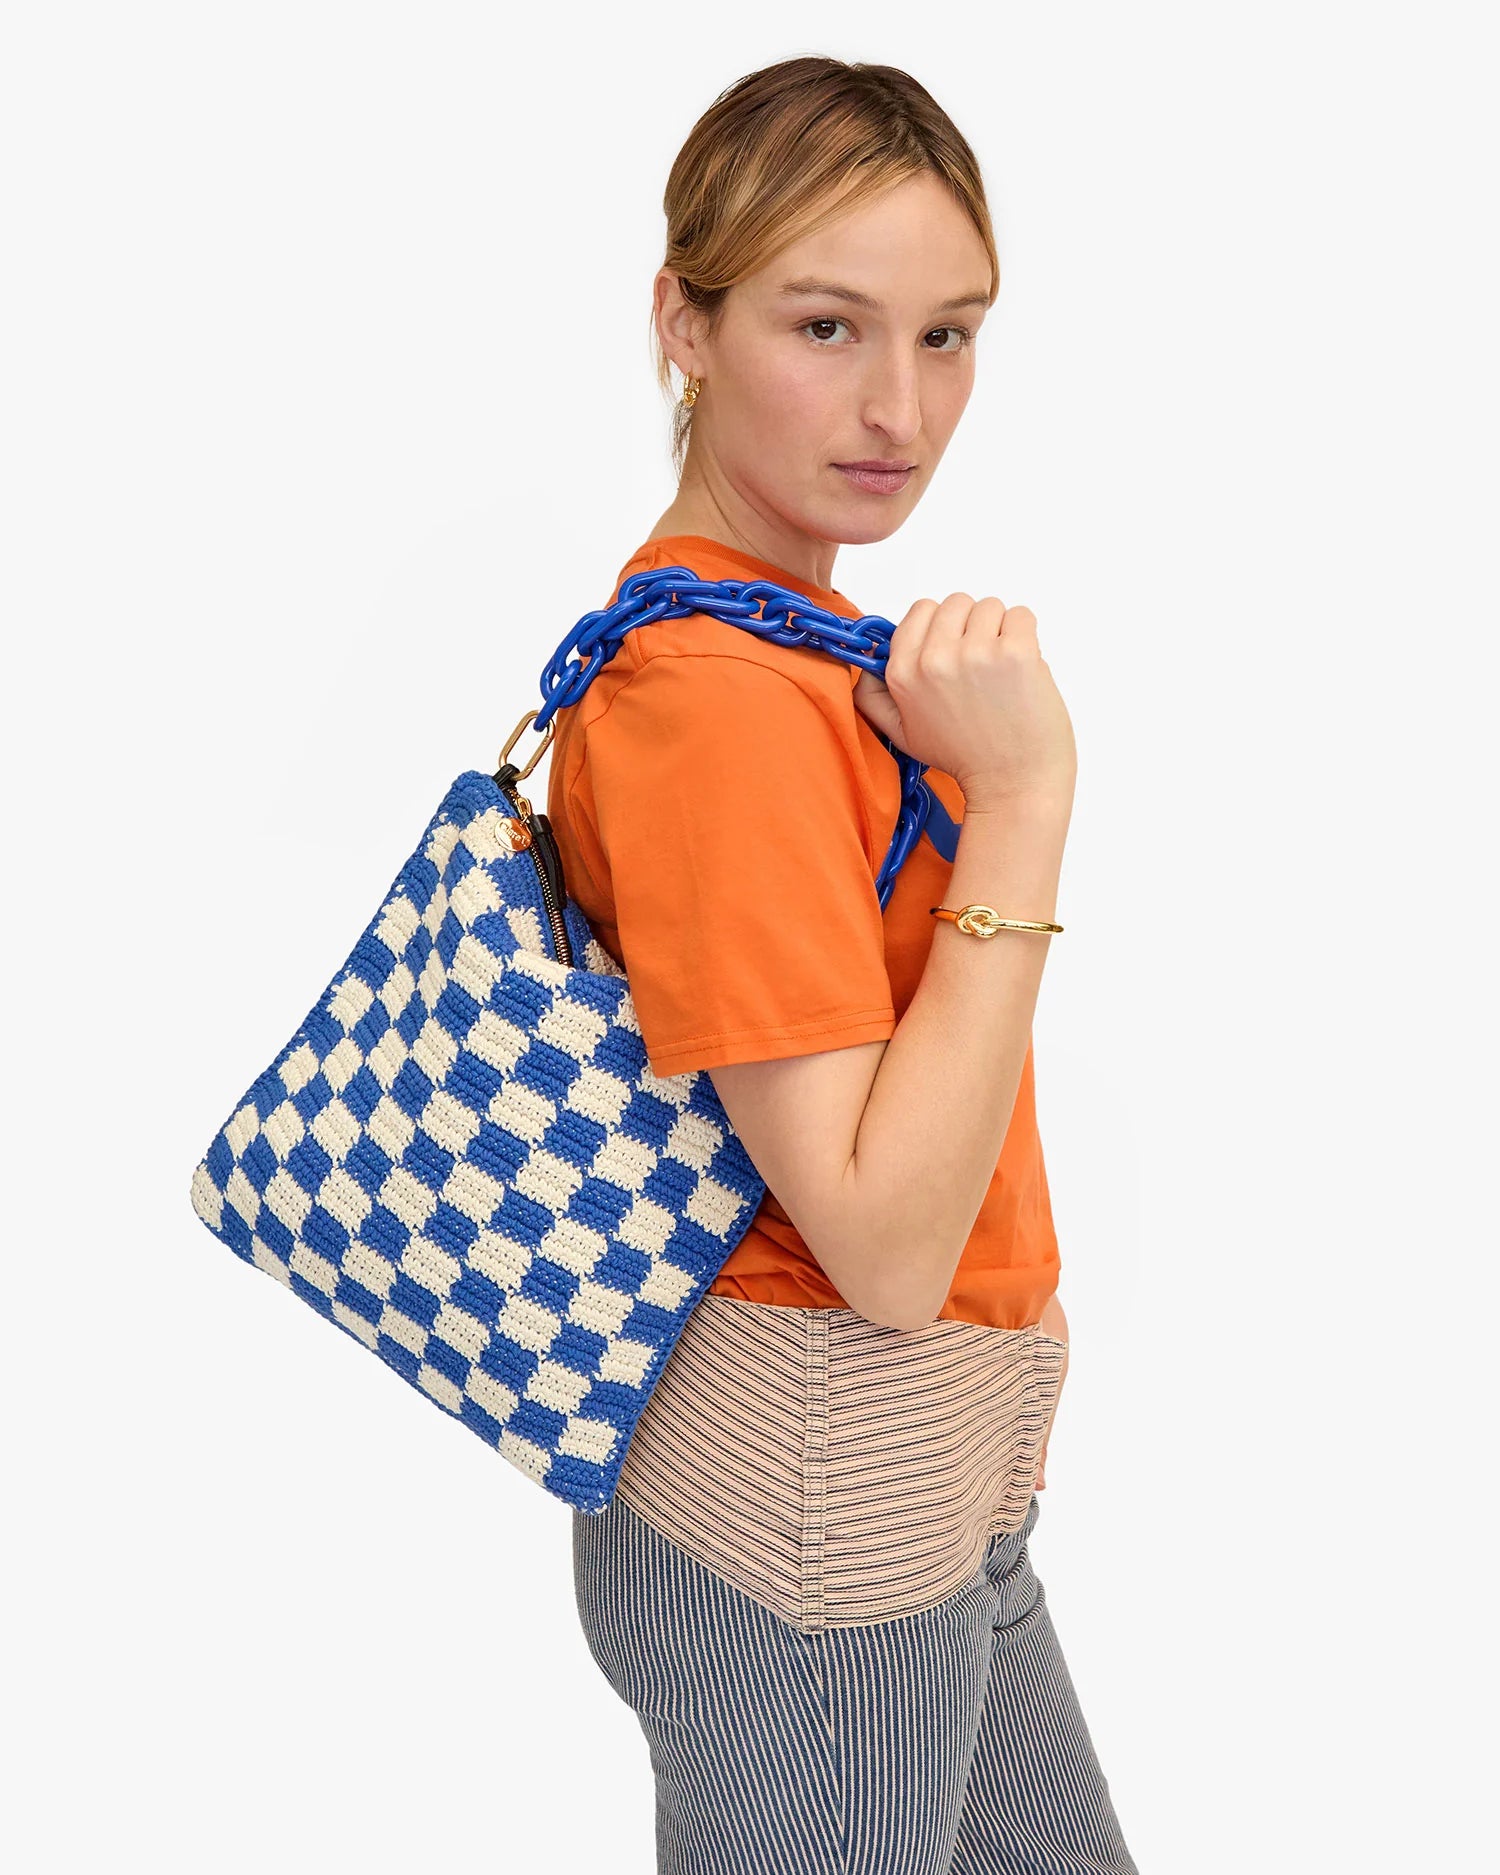 A person with light brown hair is shown from the waist up, wearing an orange t-shirt and striped pants. They are holding a Foldover Clutch w/Tabs by Clare Vivier with a blue chain strap over their shoulder. The bag, made of crocheted cotton, stands out vividly against the white background.